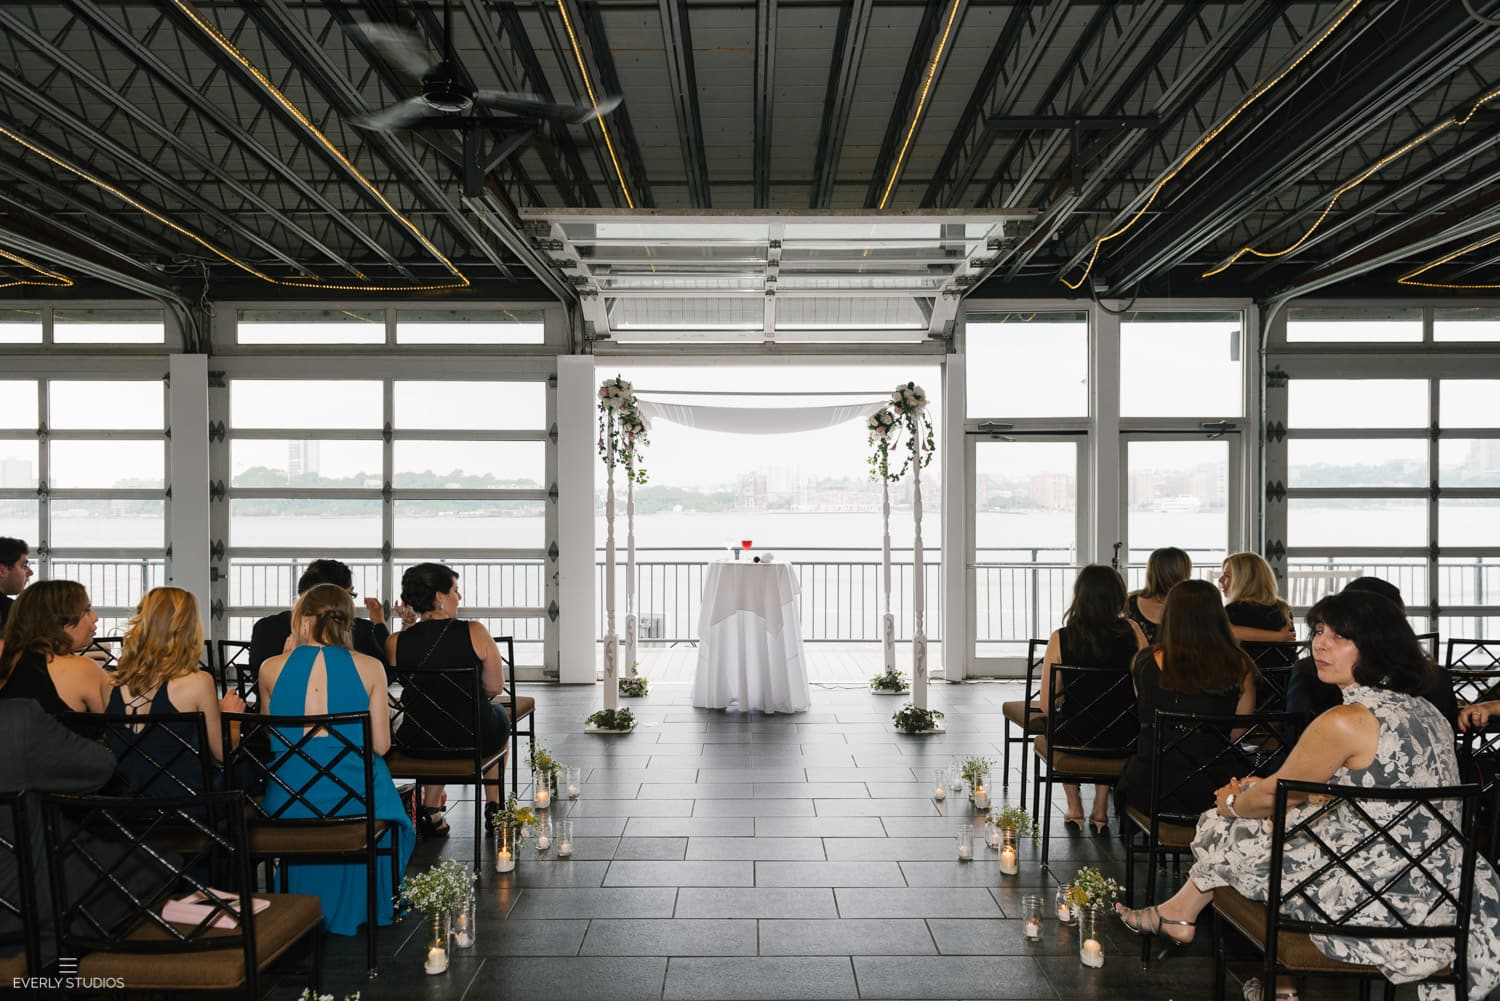 Chelsea Piers Sunset Terrace wedding on the Hudson River in NYC